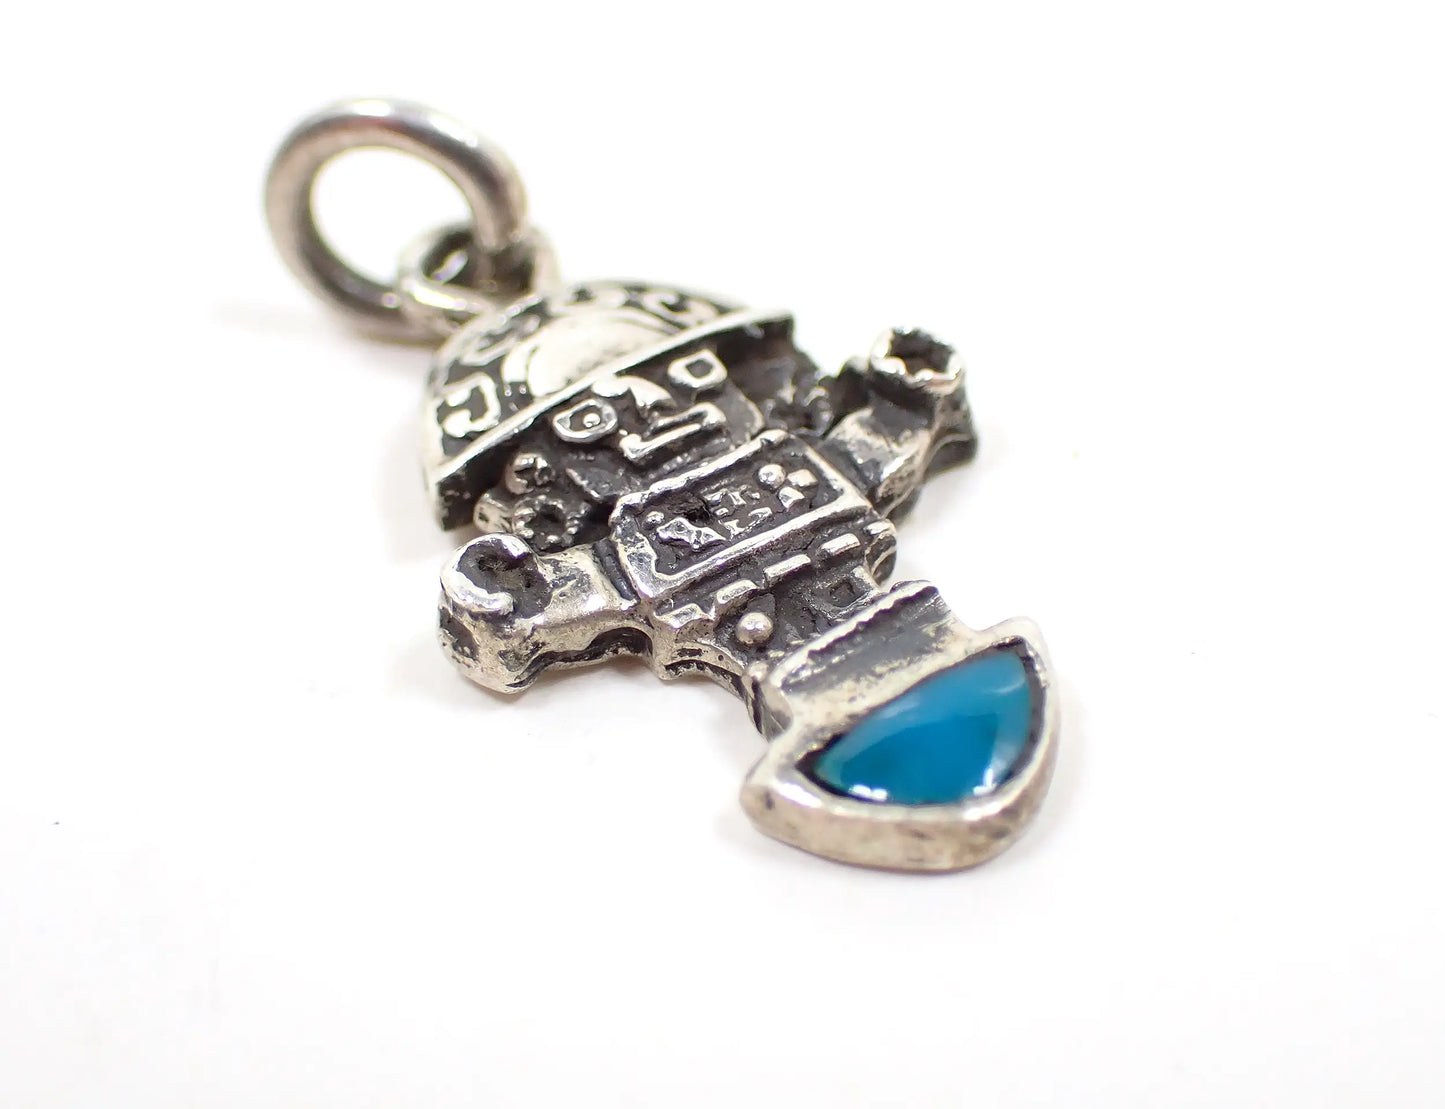 Small Retro Vintage Inca Inti Sun God Charm, Silver Tone and Turquoise, Mexican Southwestern